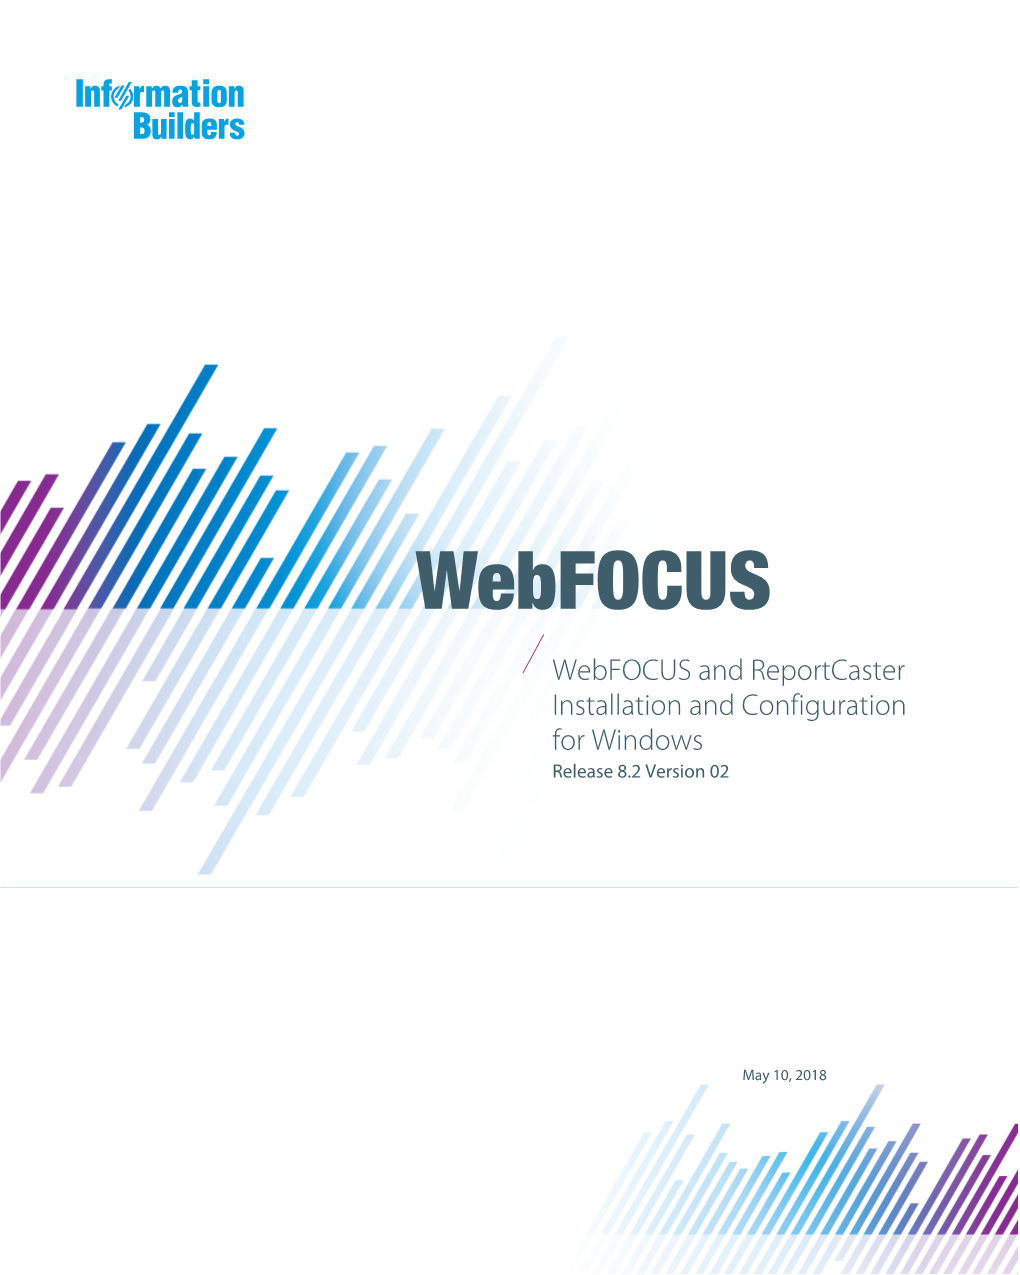 Webfocus and Reportcaster Installation and Configuration for Windows Release 8.2 Version 02